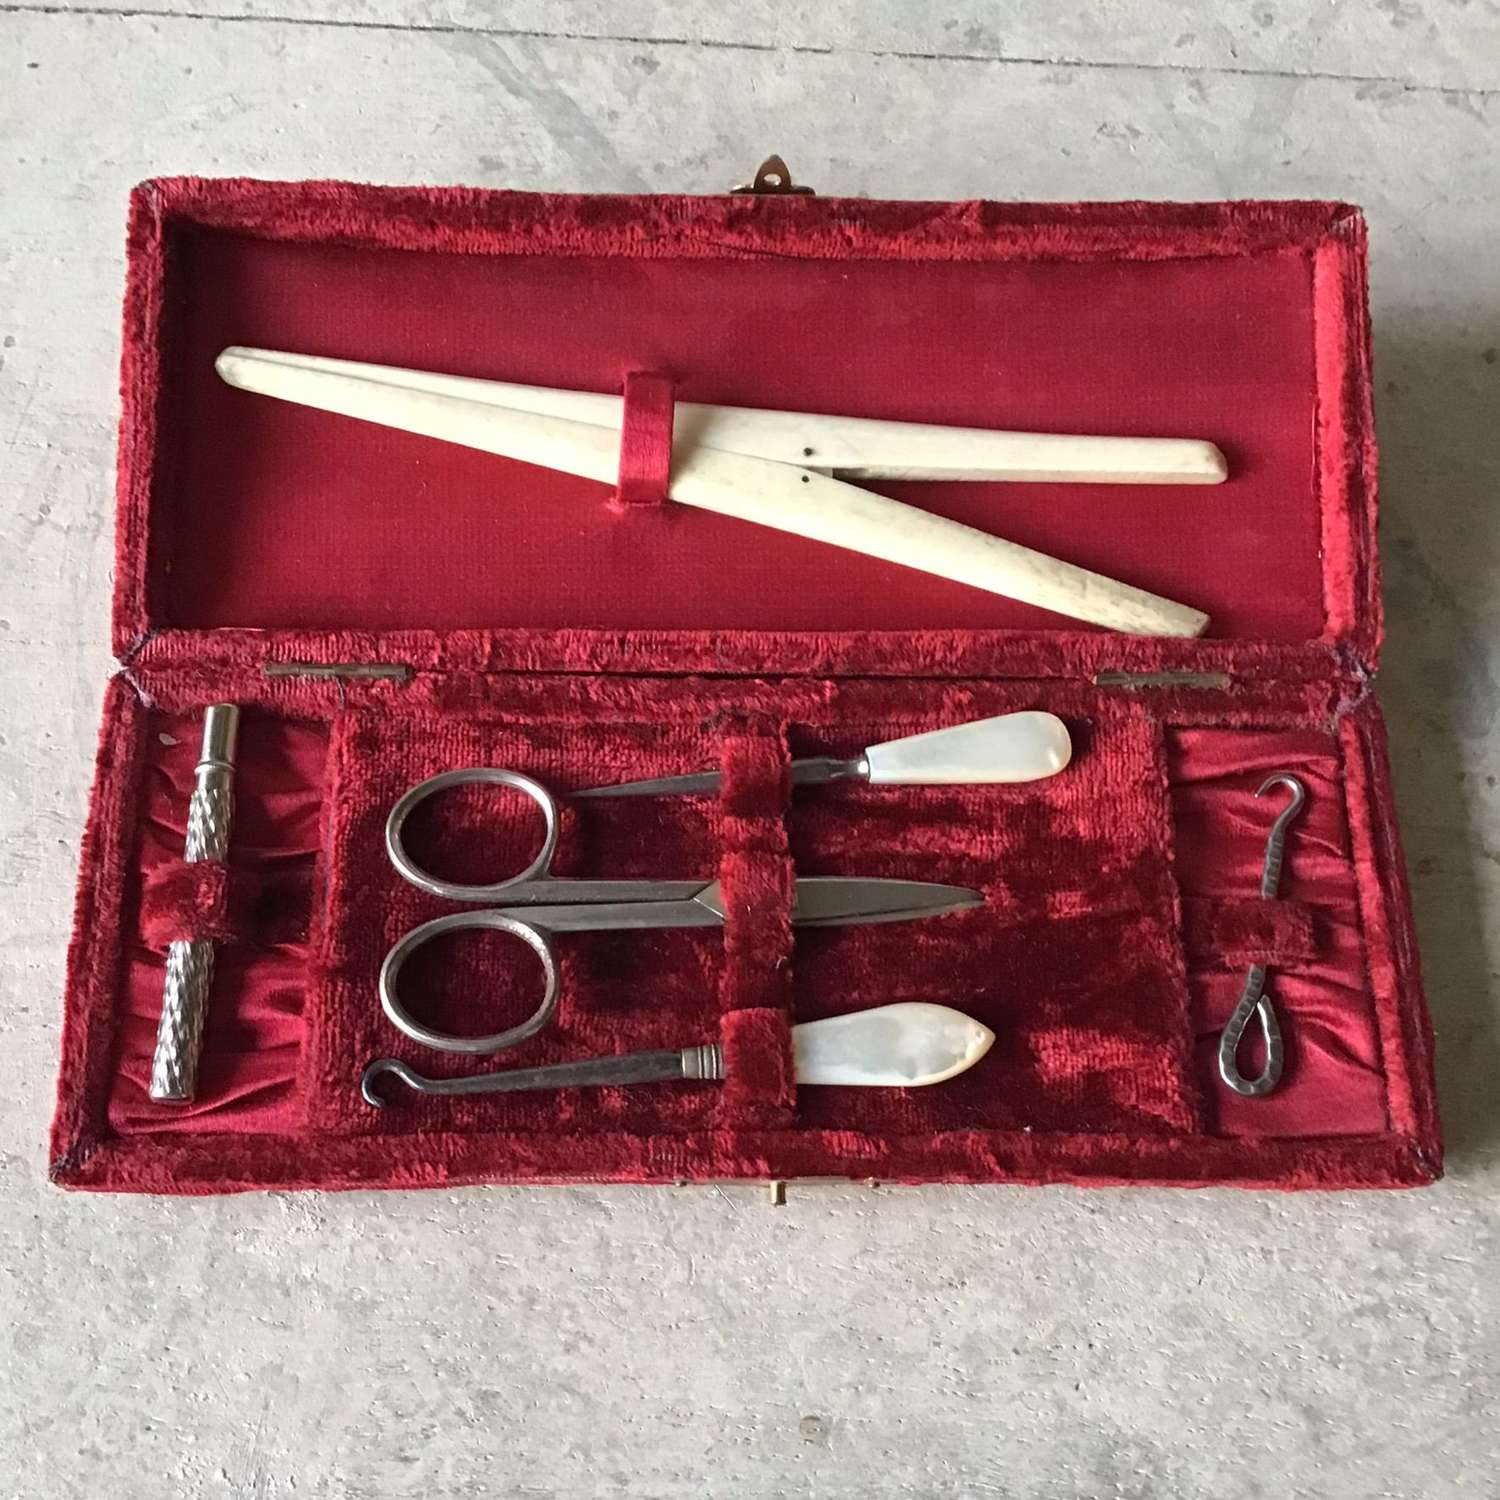 Red velvet time worn sewing kit with sewing implements